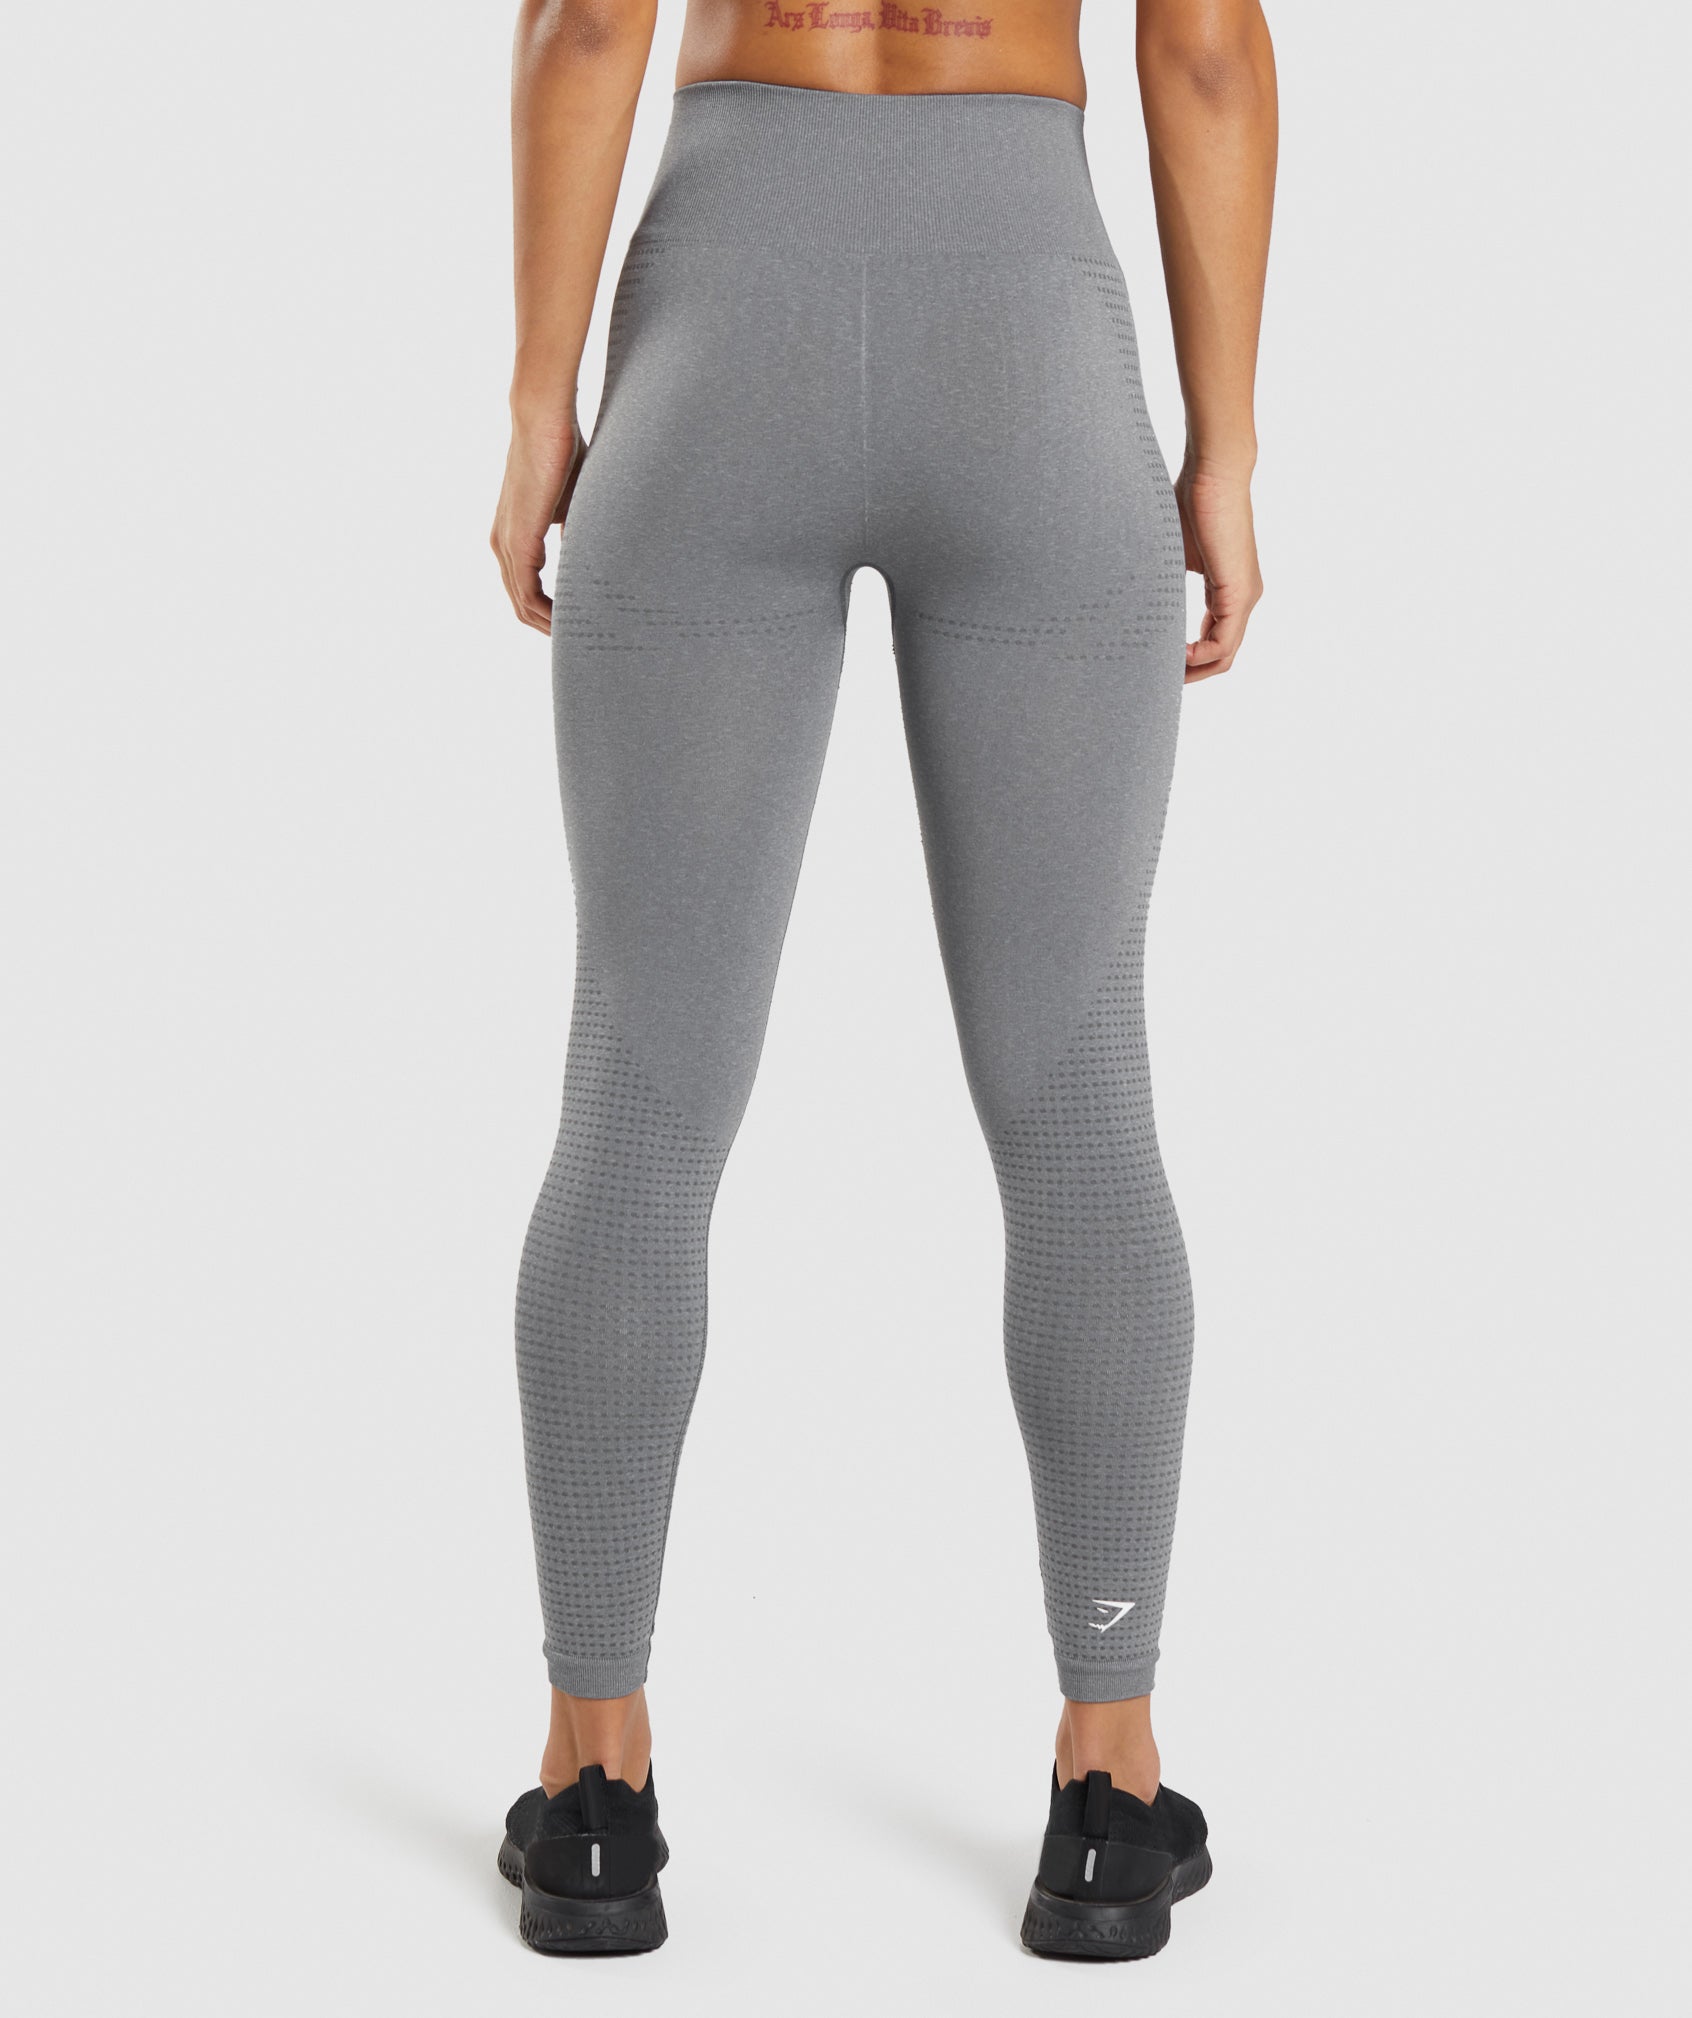 Gymshark Energy Seamless Leggings Small New without tags - $52 - From Trendy